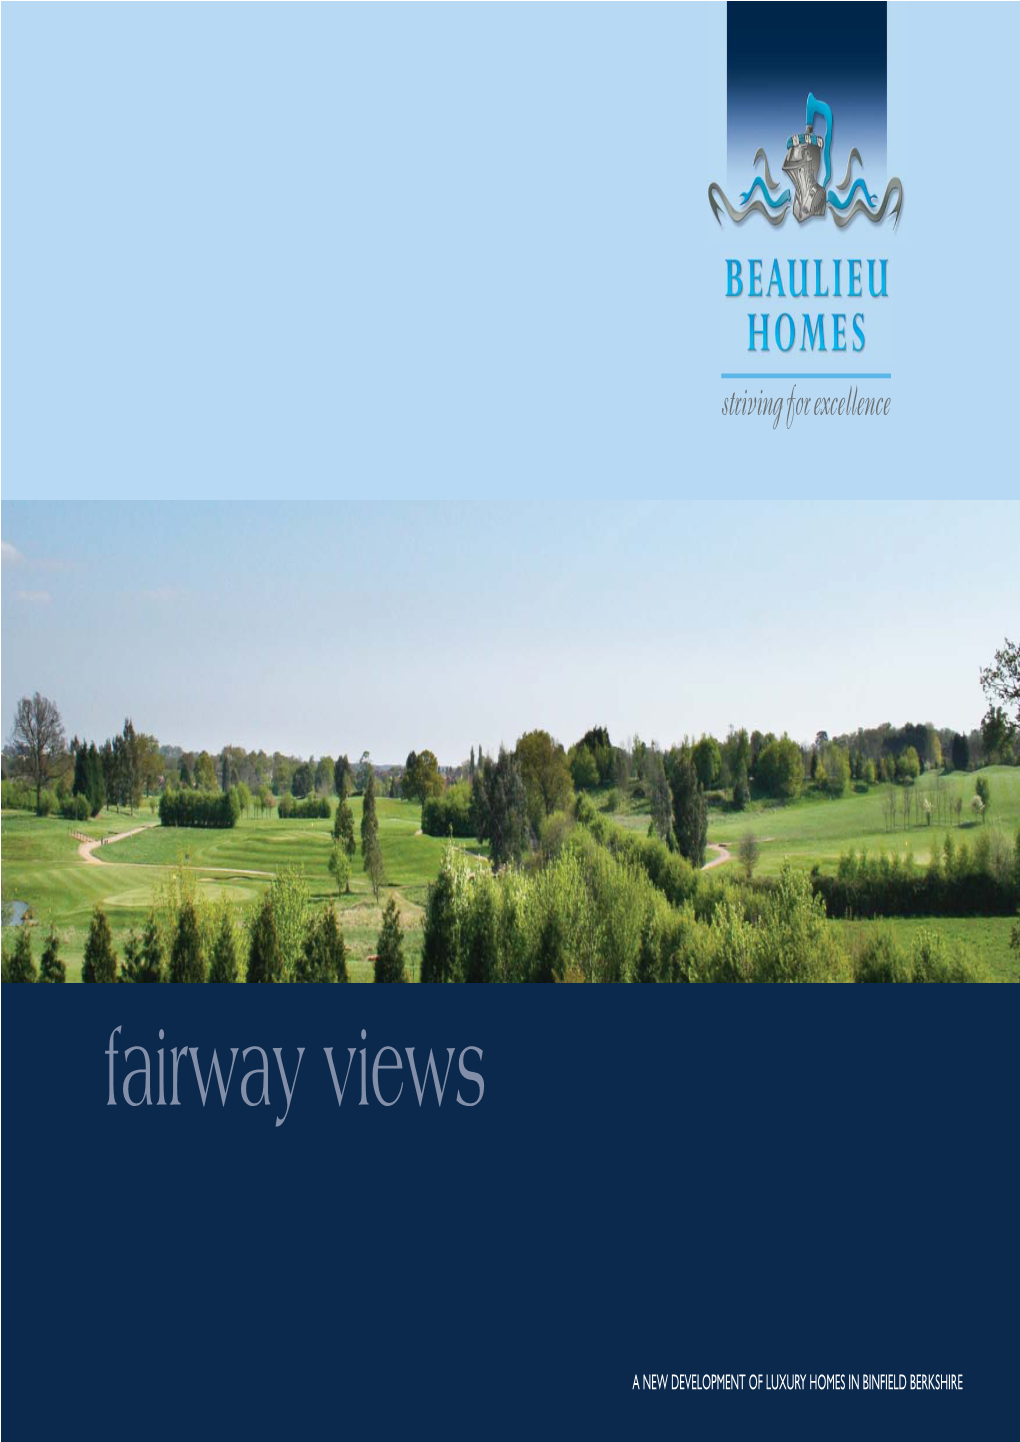 To Download Our Fairway Views